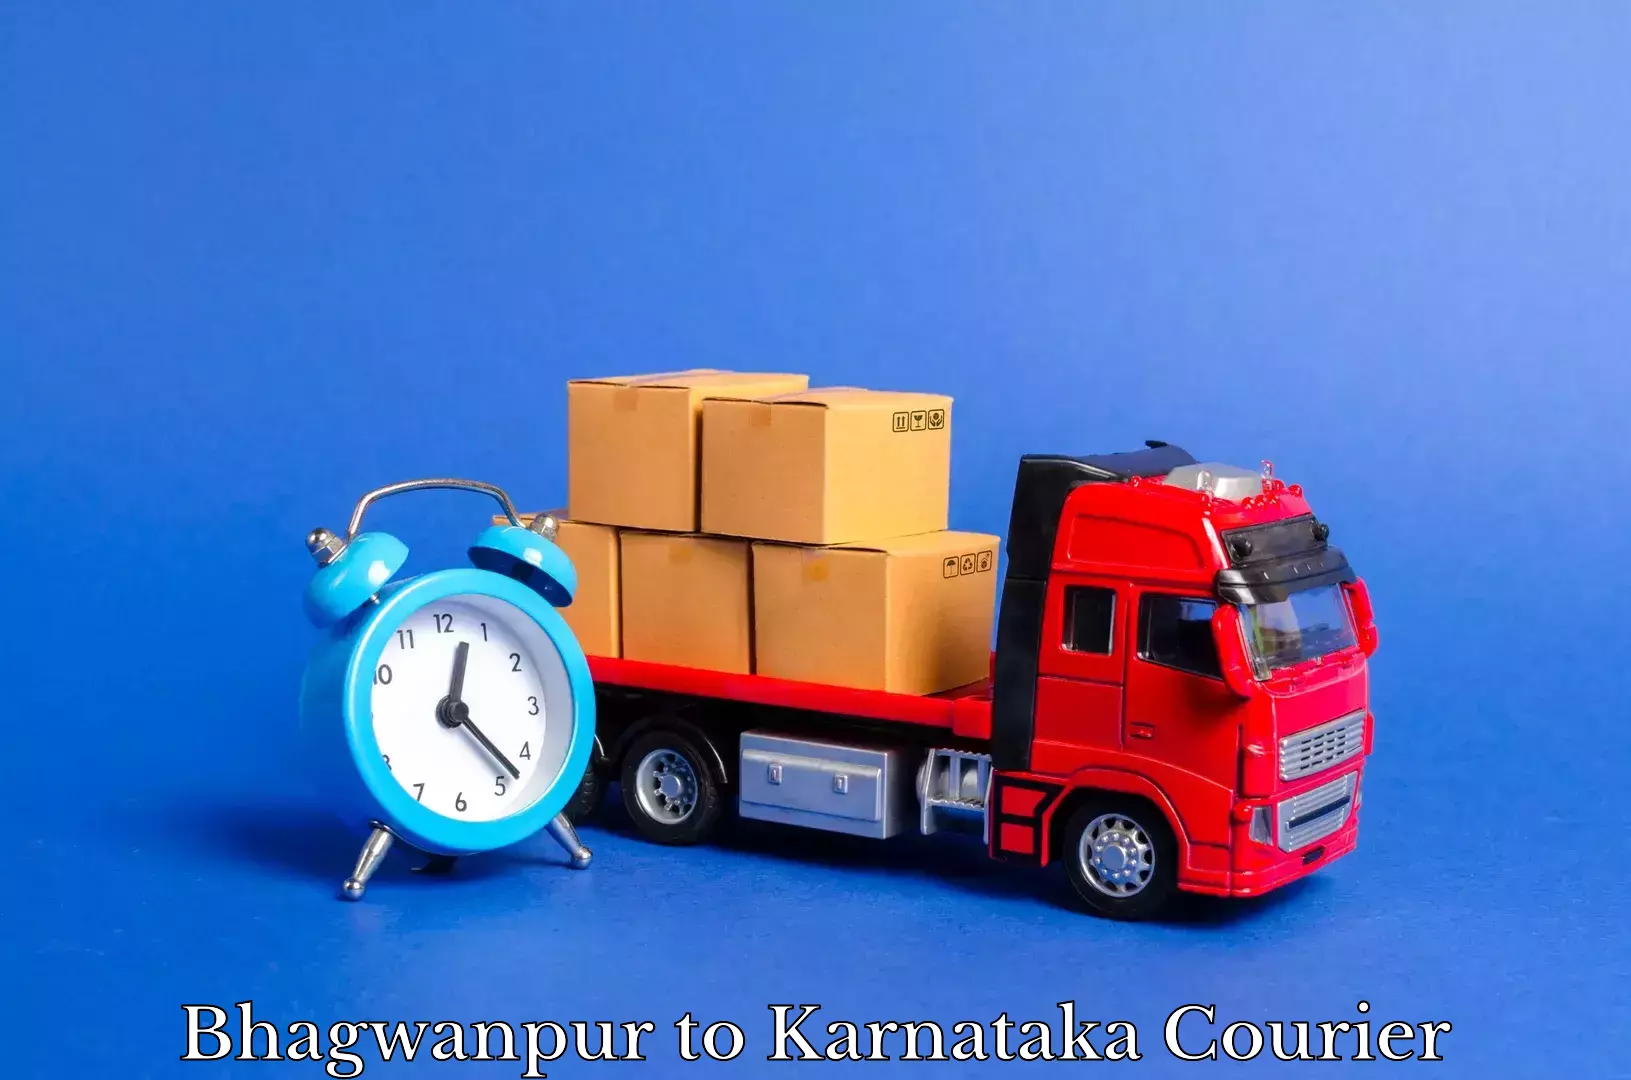 Professional relocation services in Bhagwanpur to Karnataka